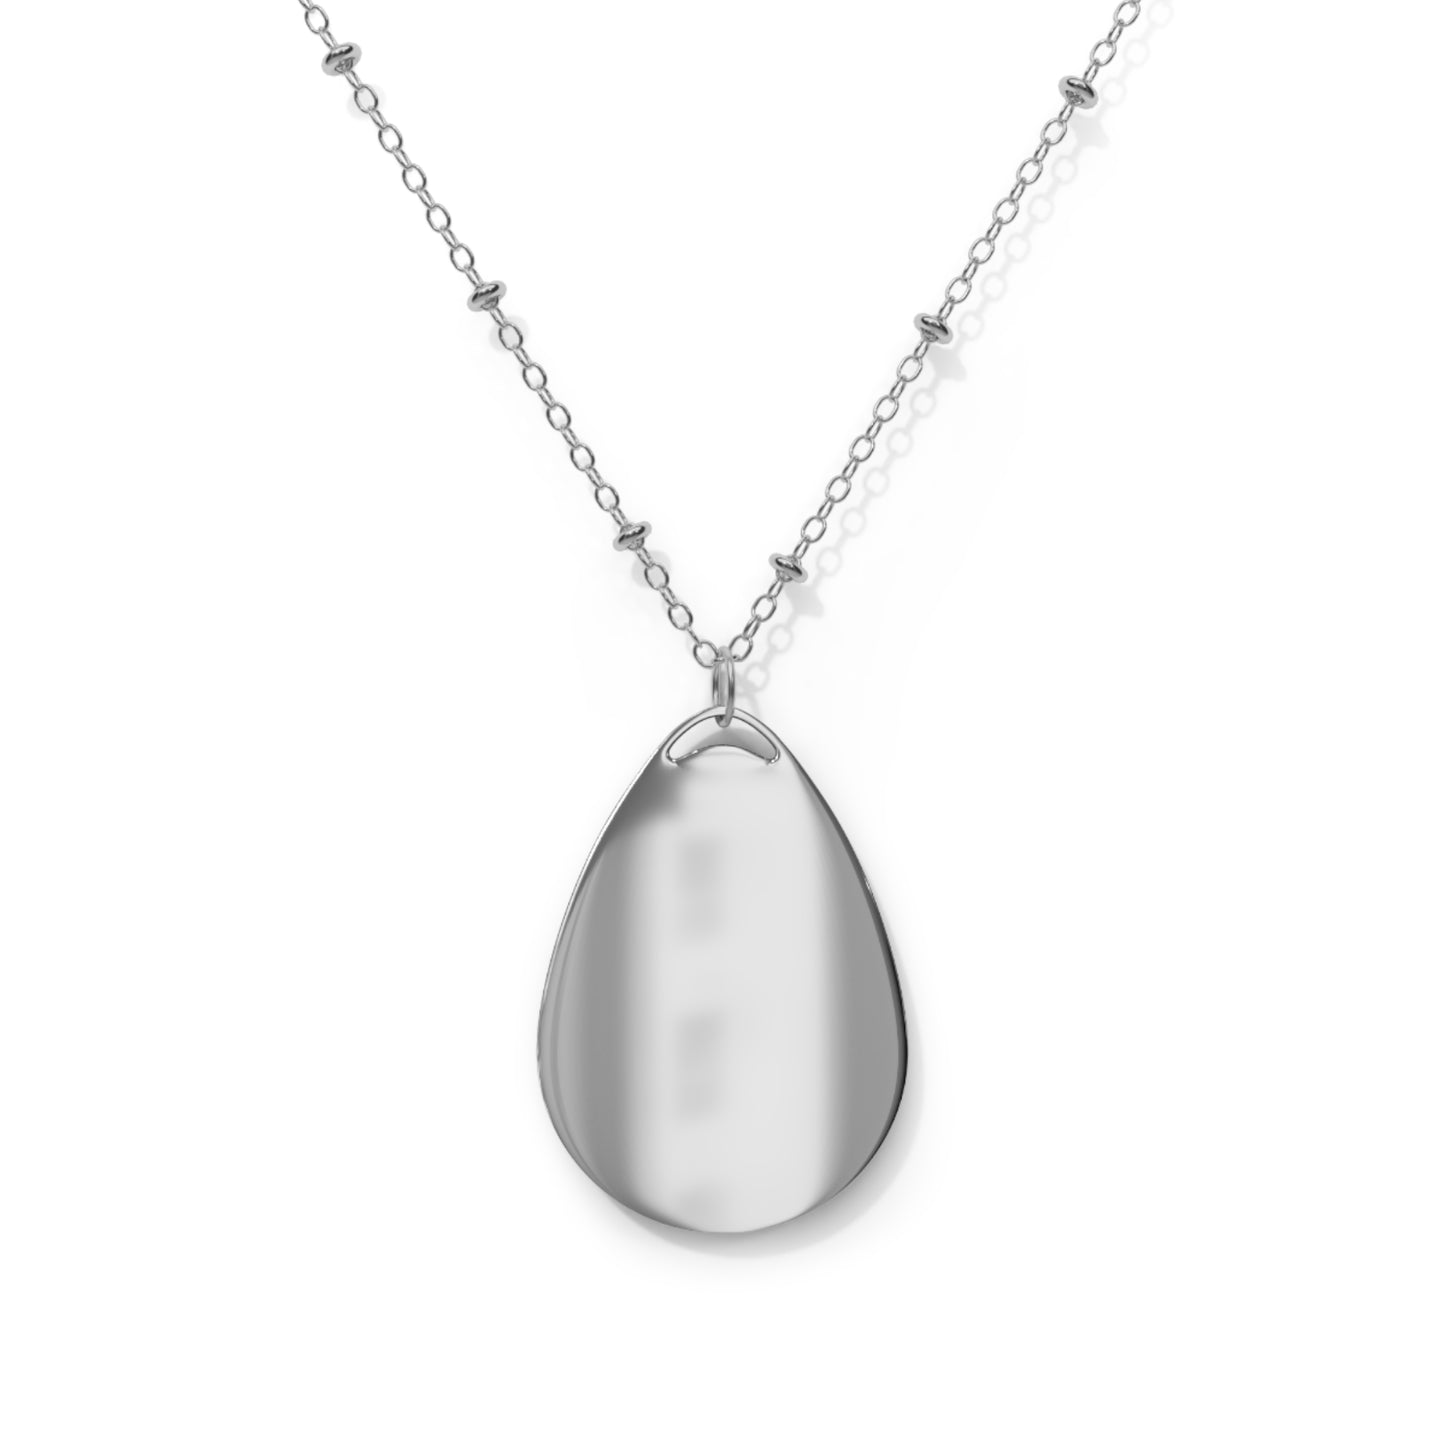 Must Get, Oval Necklace